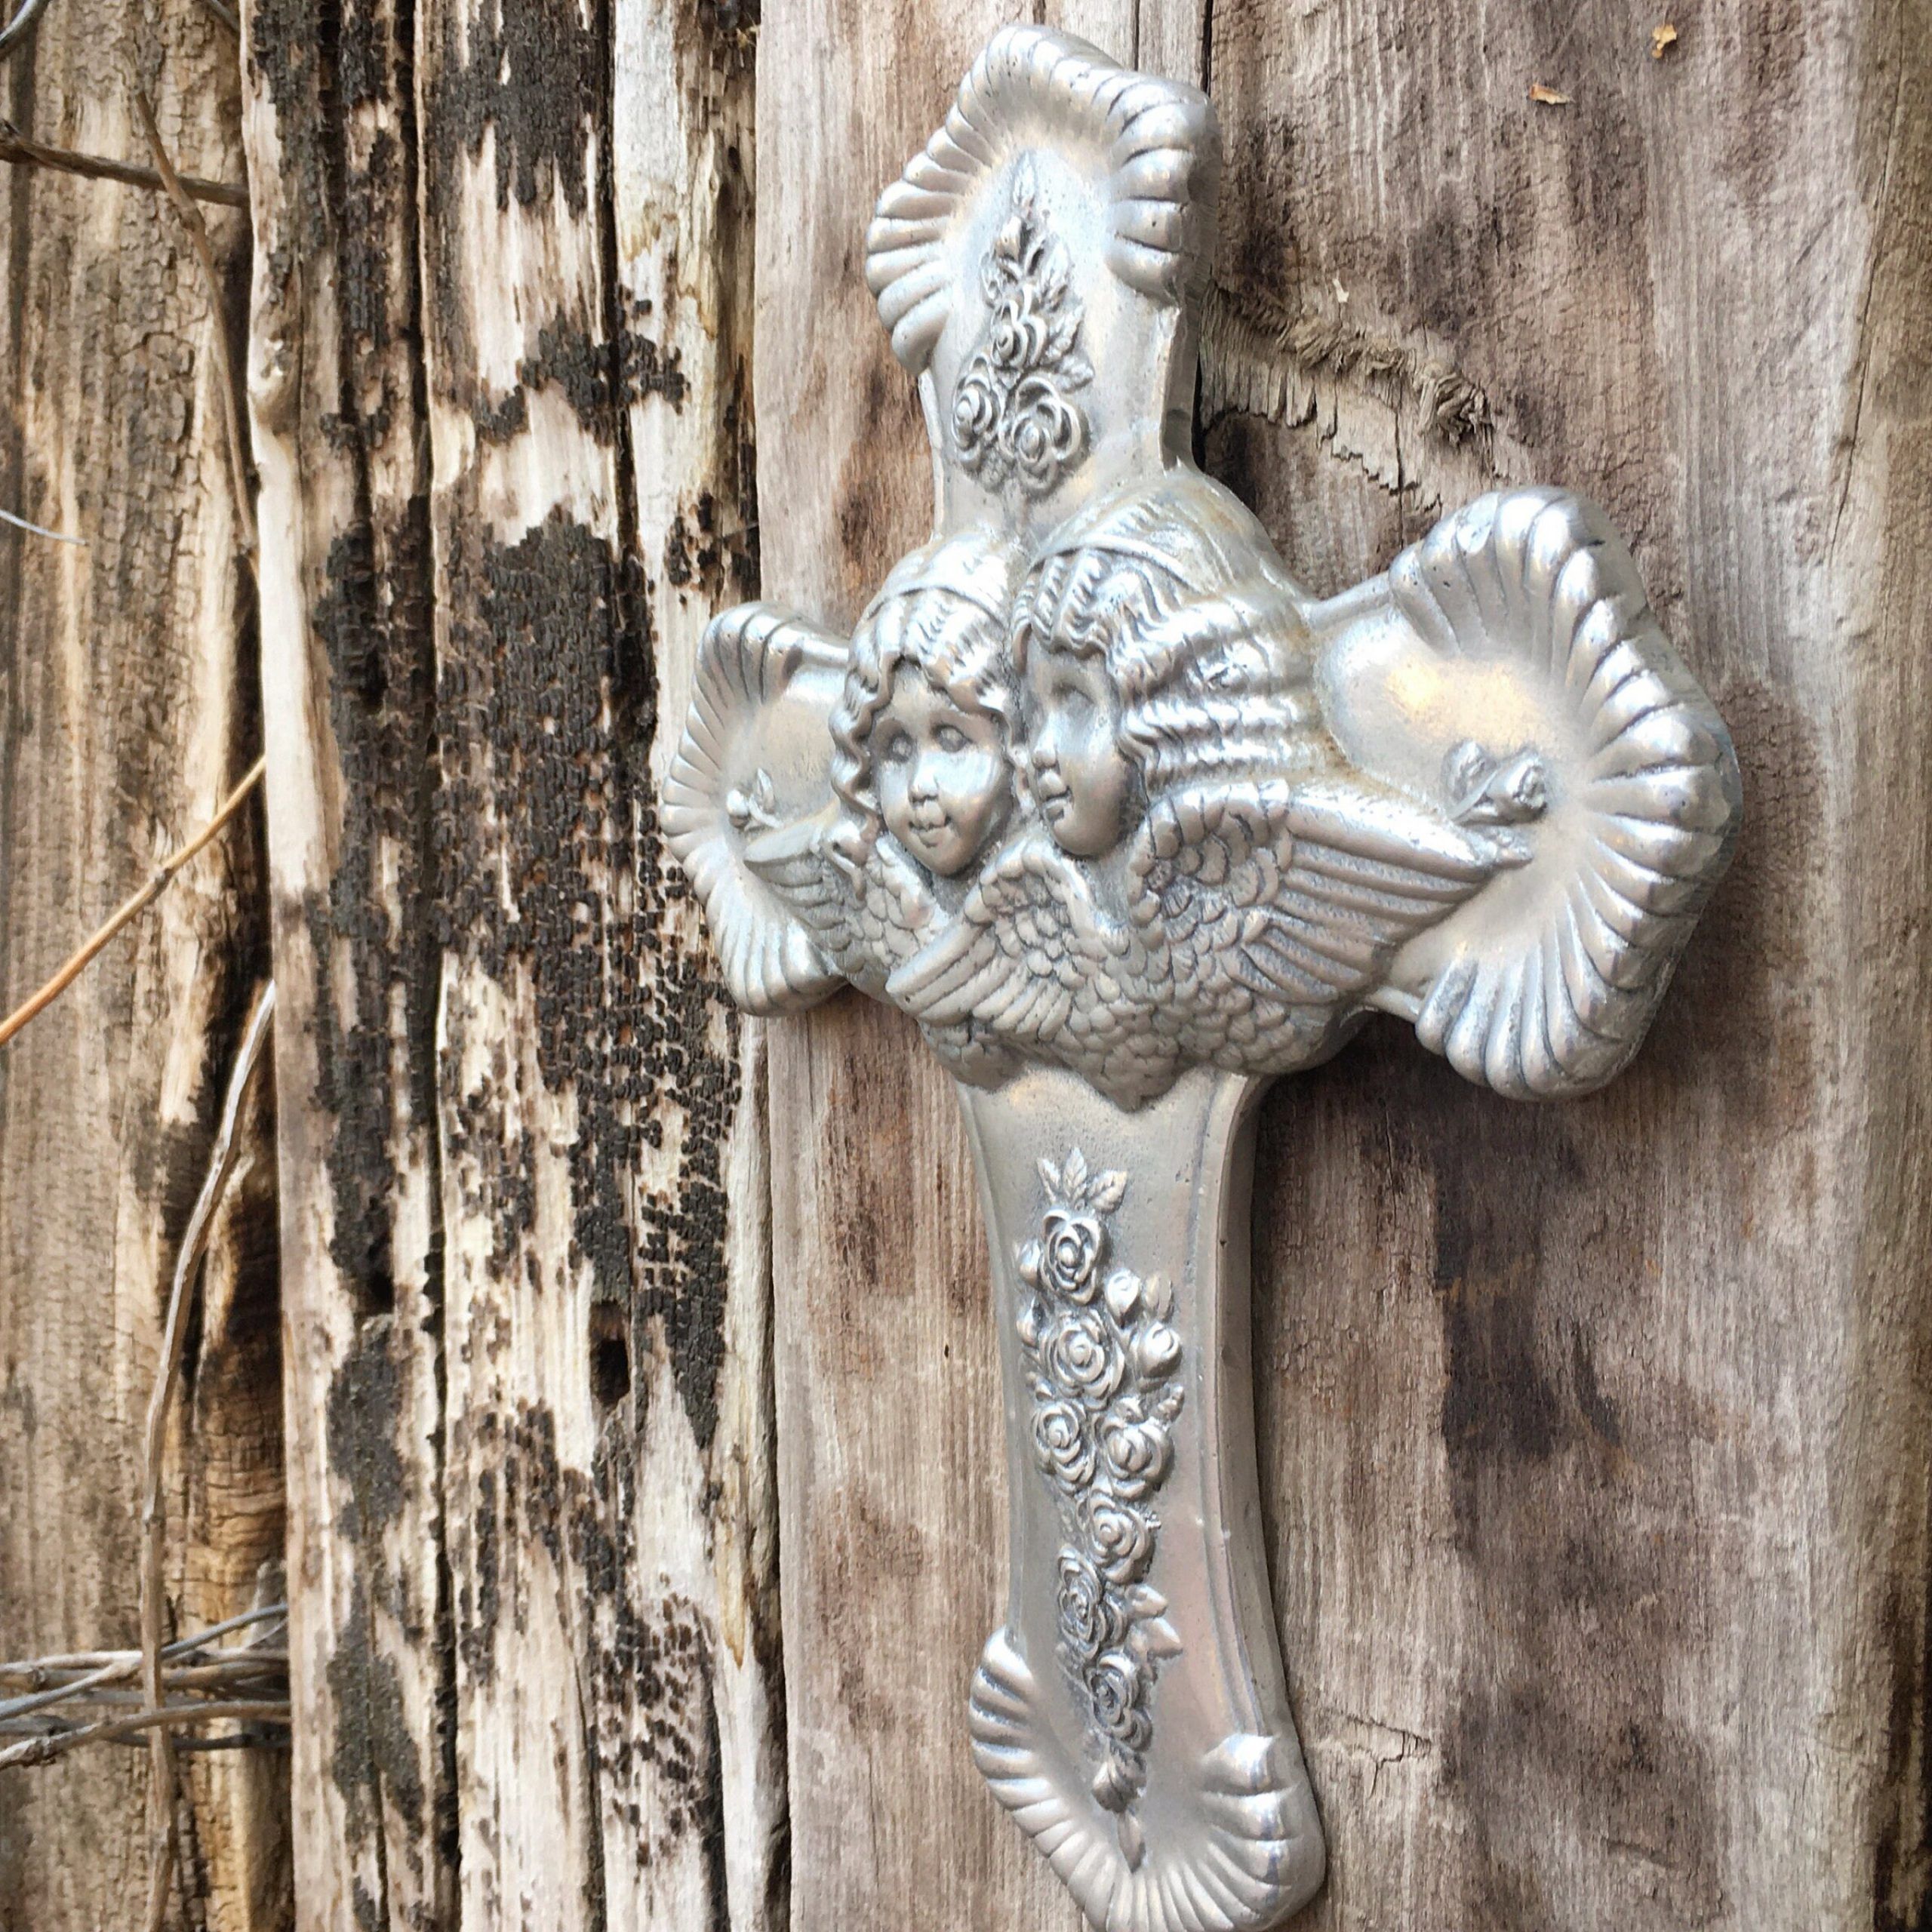 Pewter Metal Wall Cross With Winged Angels, Mexican Rustic Home Decor Throughout Pewter Metal Wall Art (View 9 of 15)